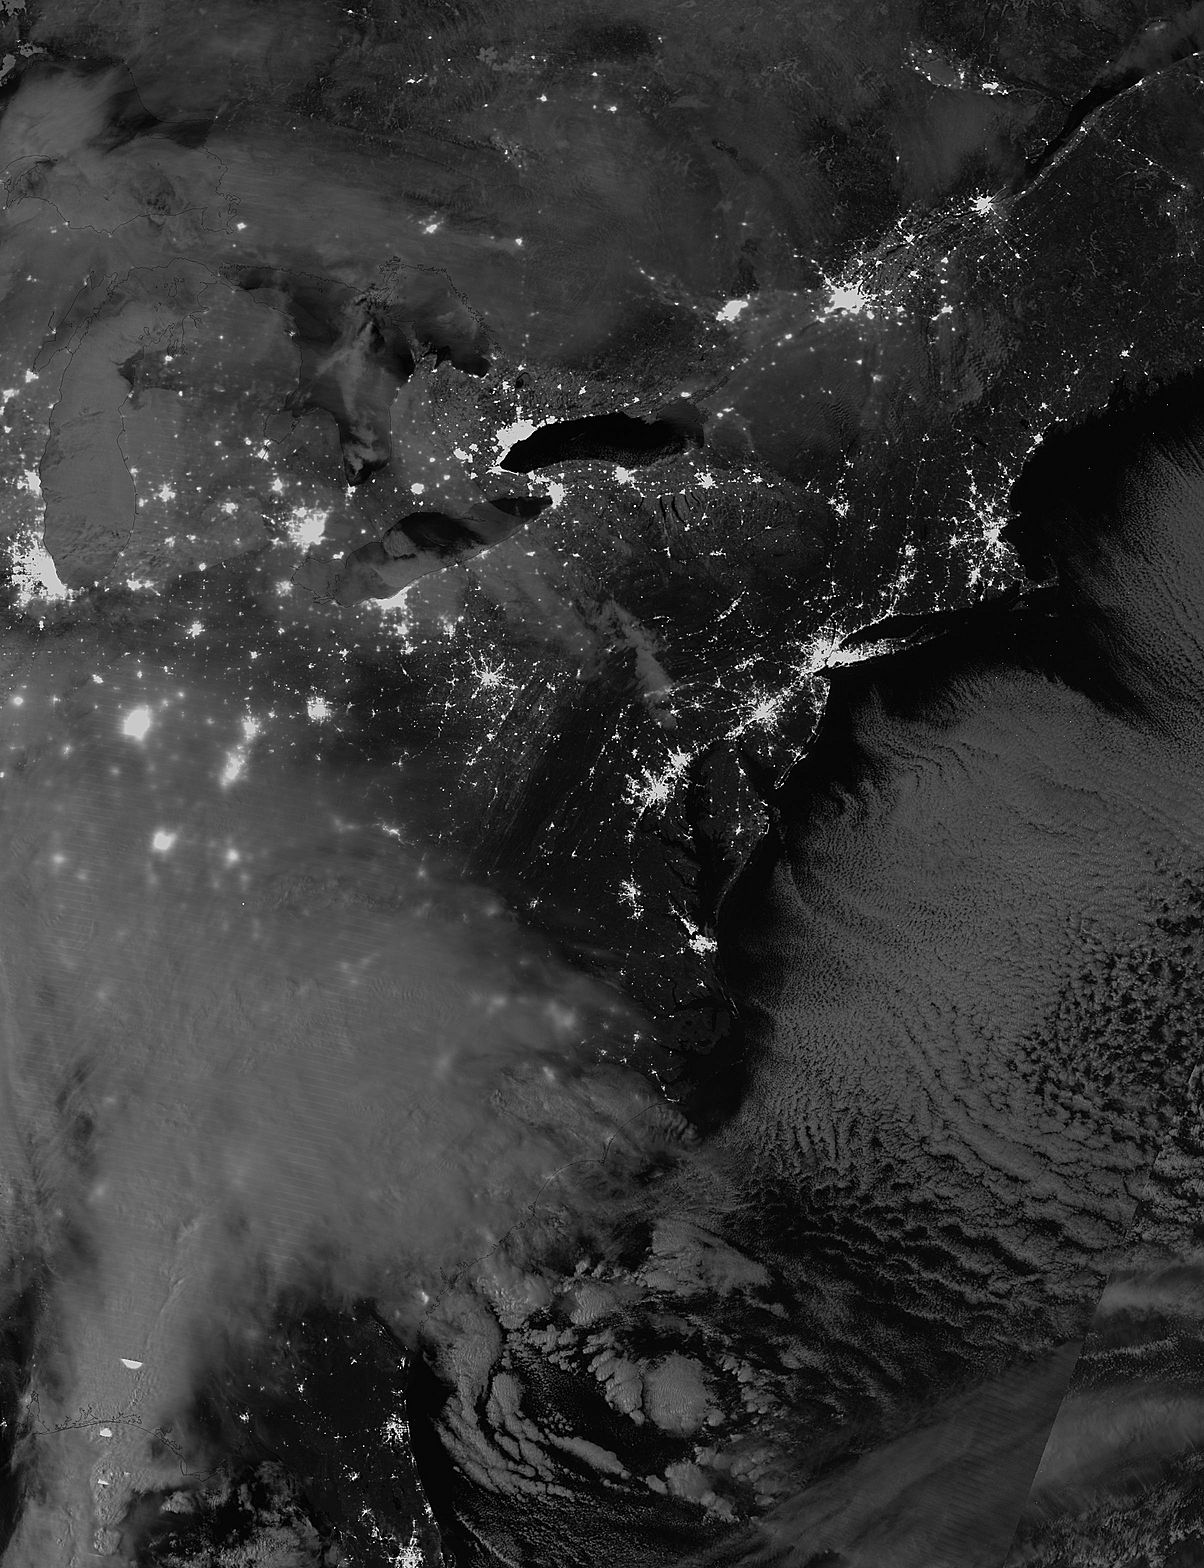 Eastern United States before winter storm (Day/Night Band) - related image preview